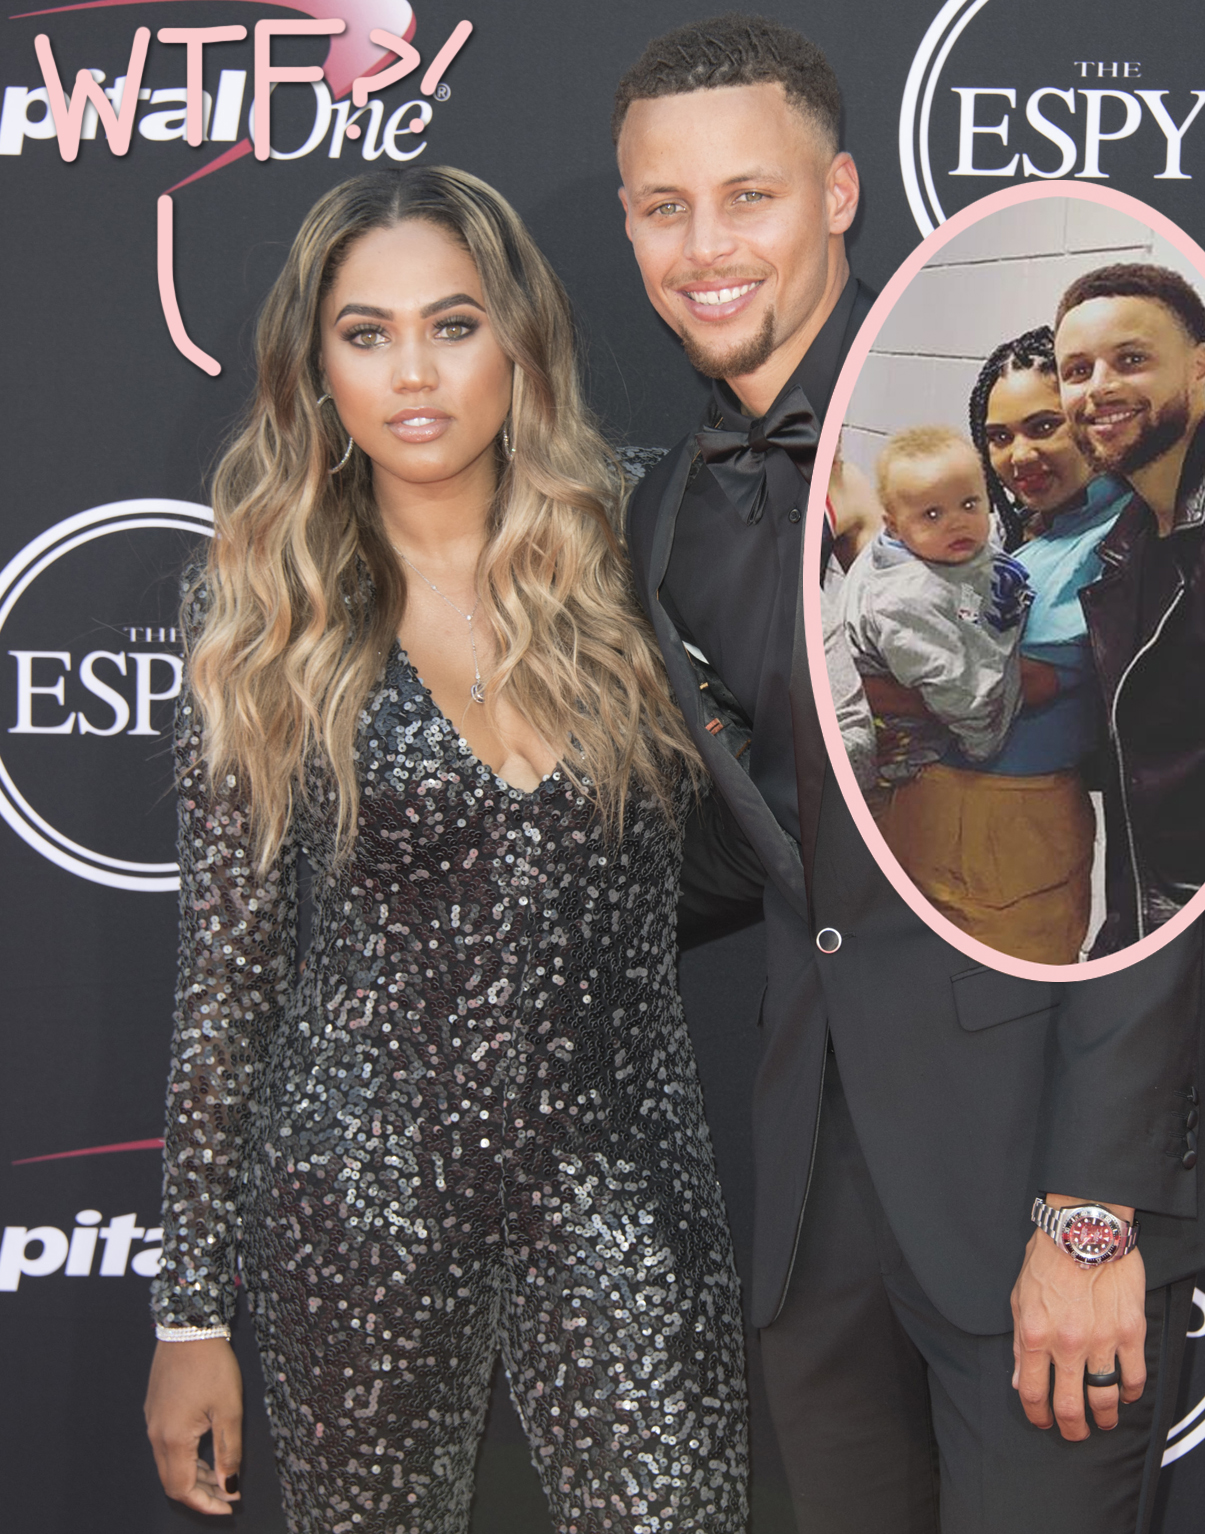 Ayesha Curry Says She's 'Close' to Reaching Her Post-Baby 'Goal' Weight